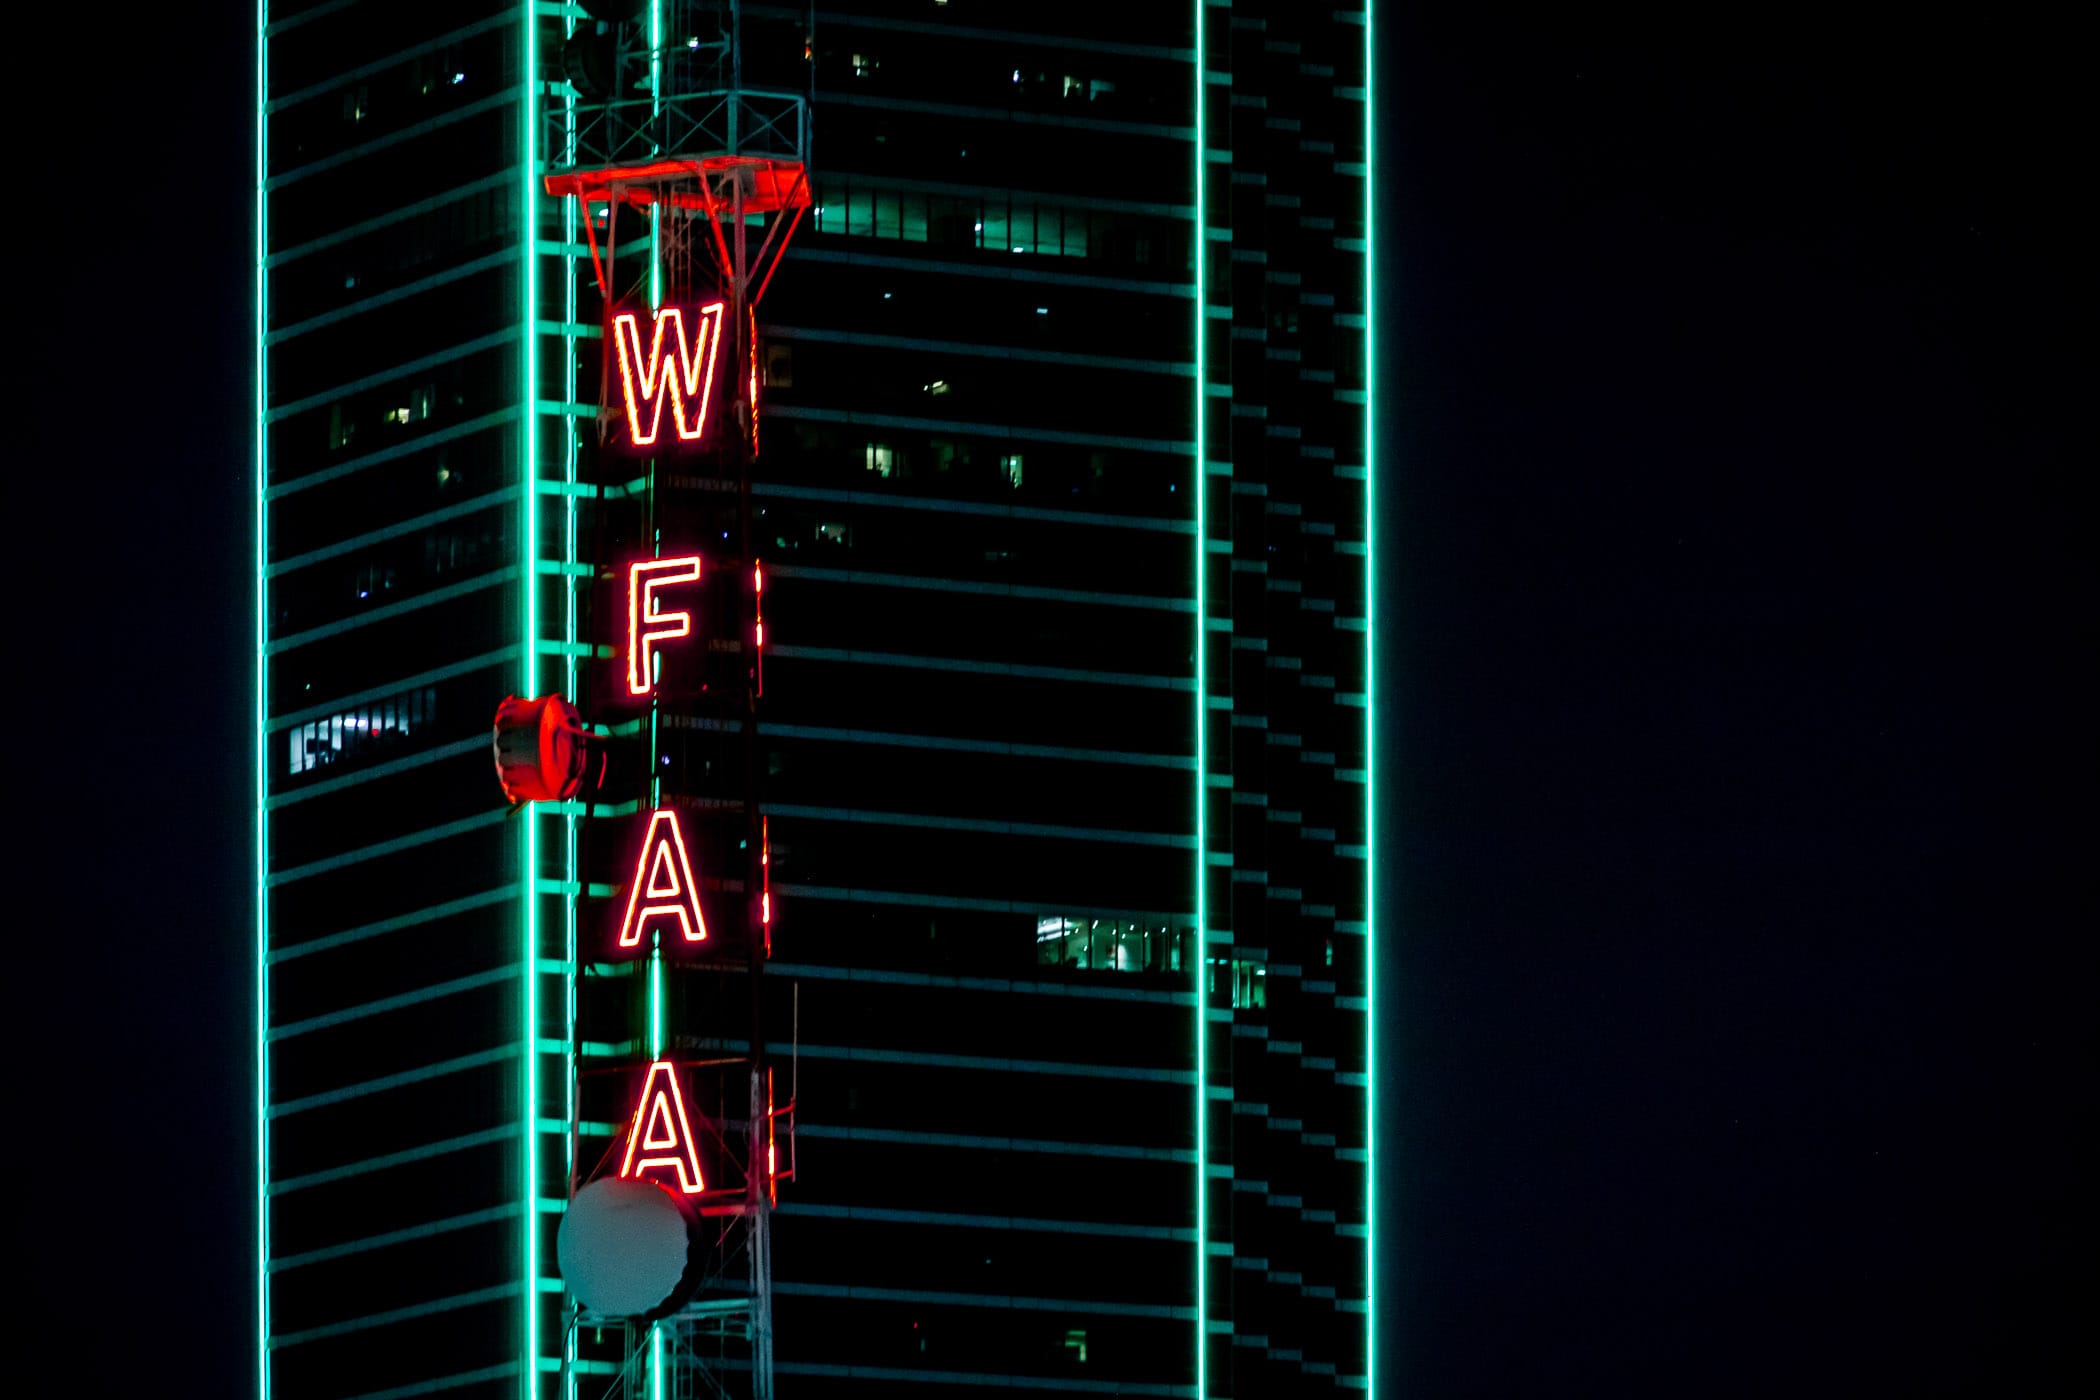 A broadcast tower at WFAA glows in Dallas' night sky near Bank of America Plaza.